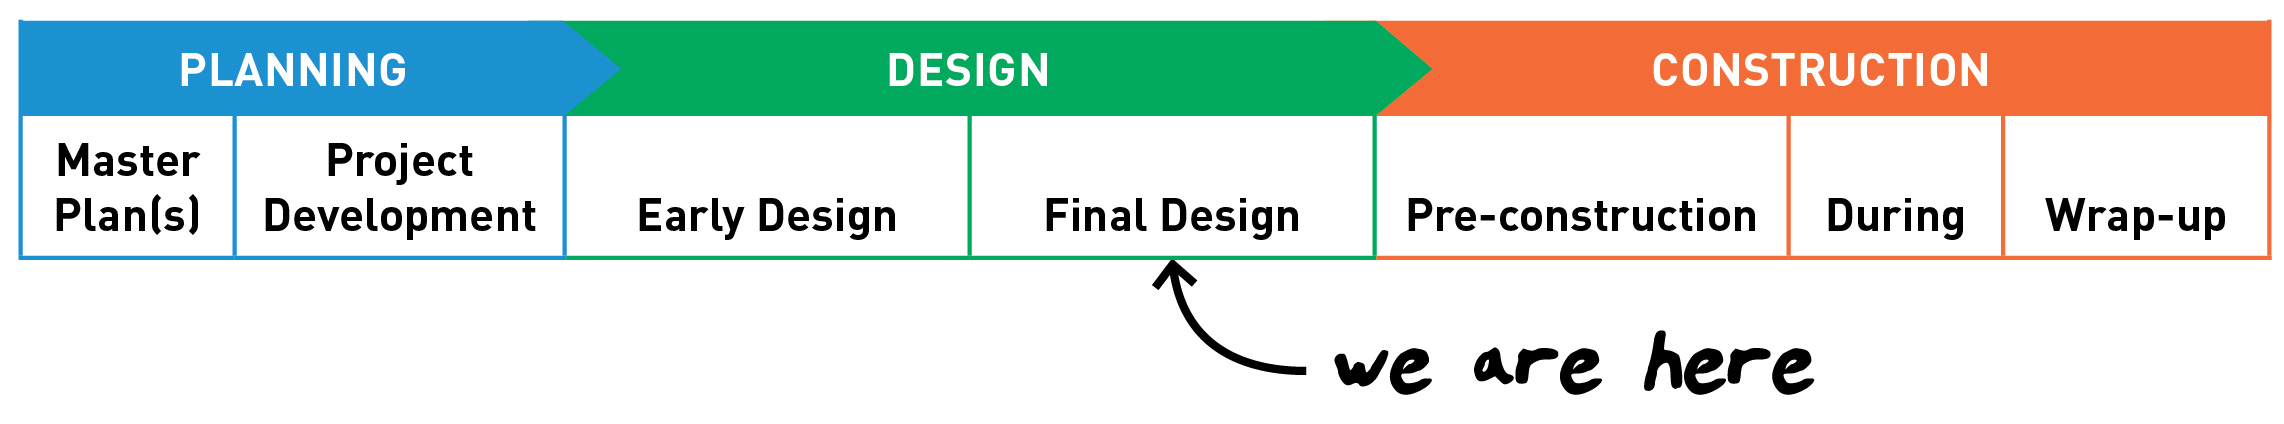 Timeline showing we are half way through the design process